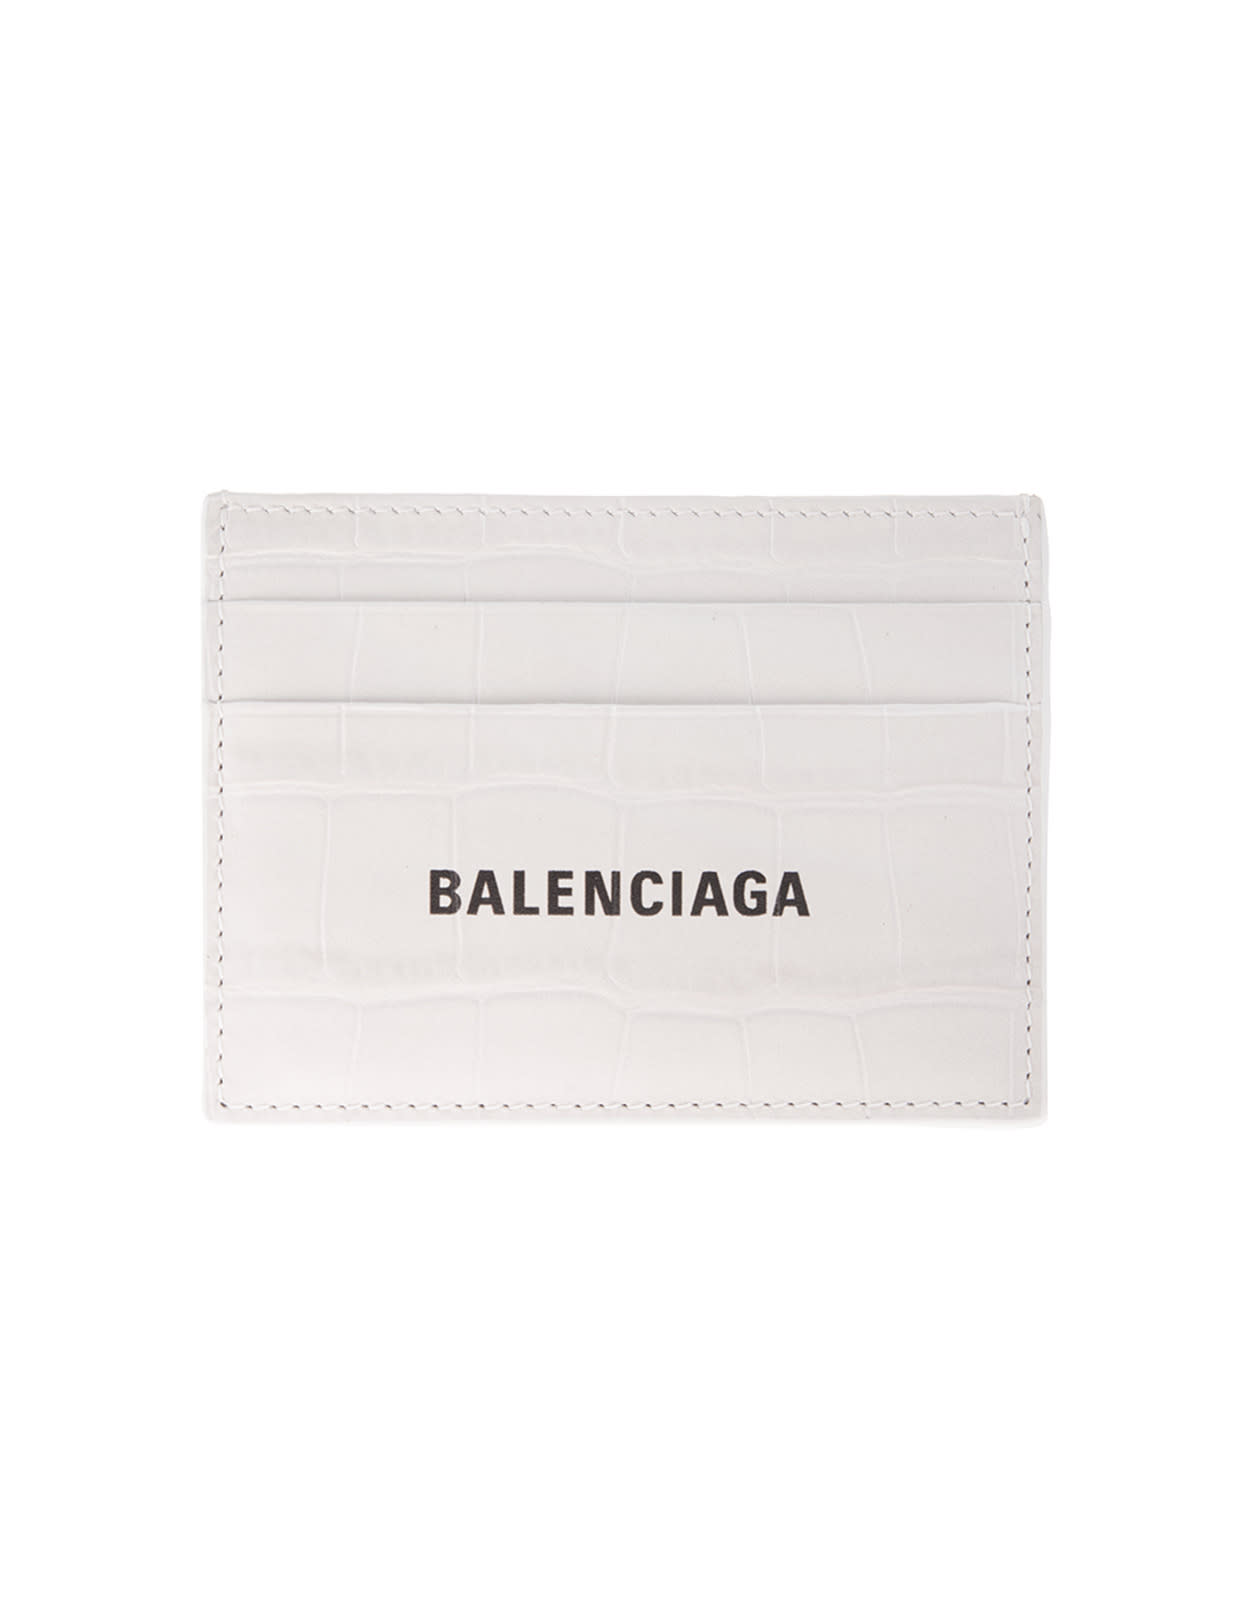 Balenciaga Man Crocodile Embossed White Leather Card Holder With Contrast Logo